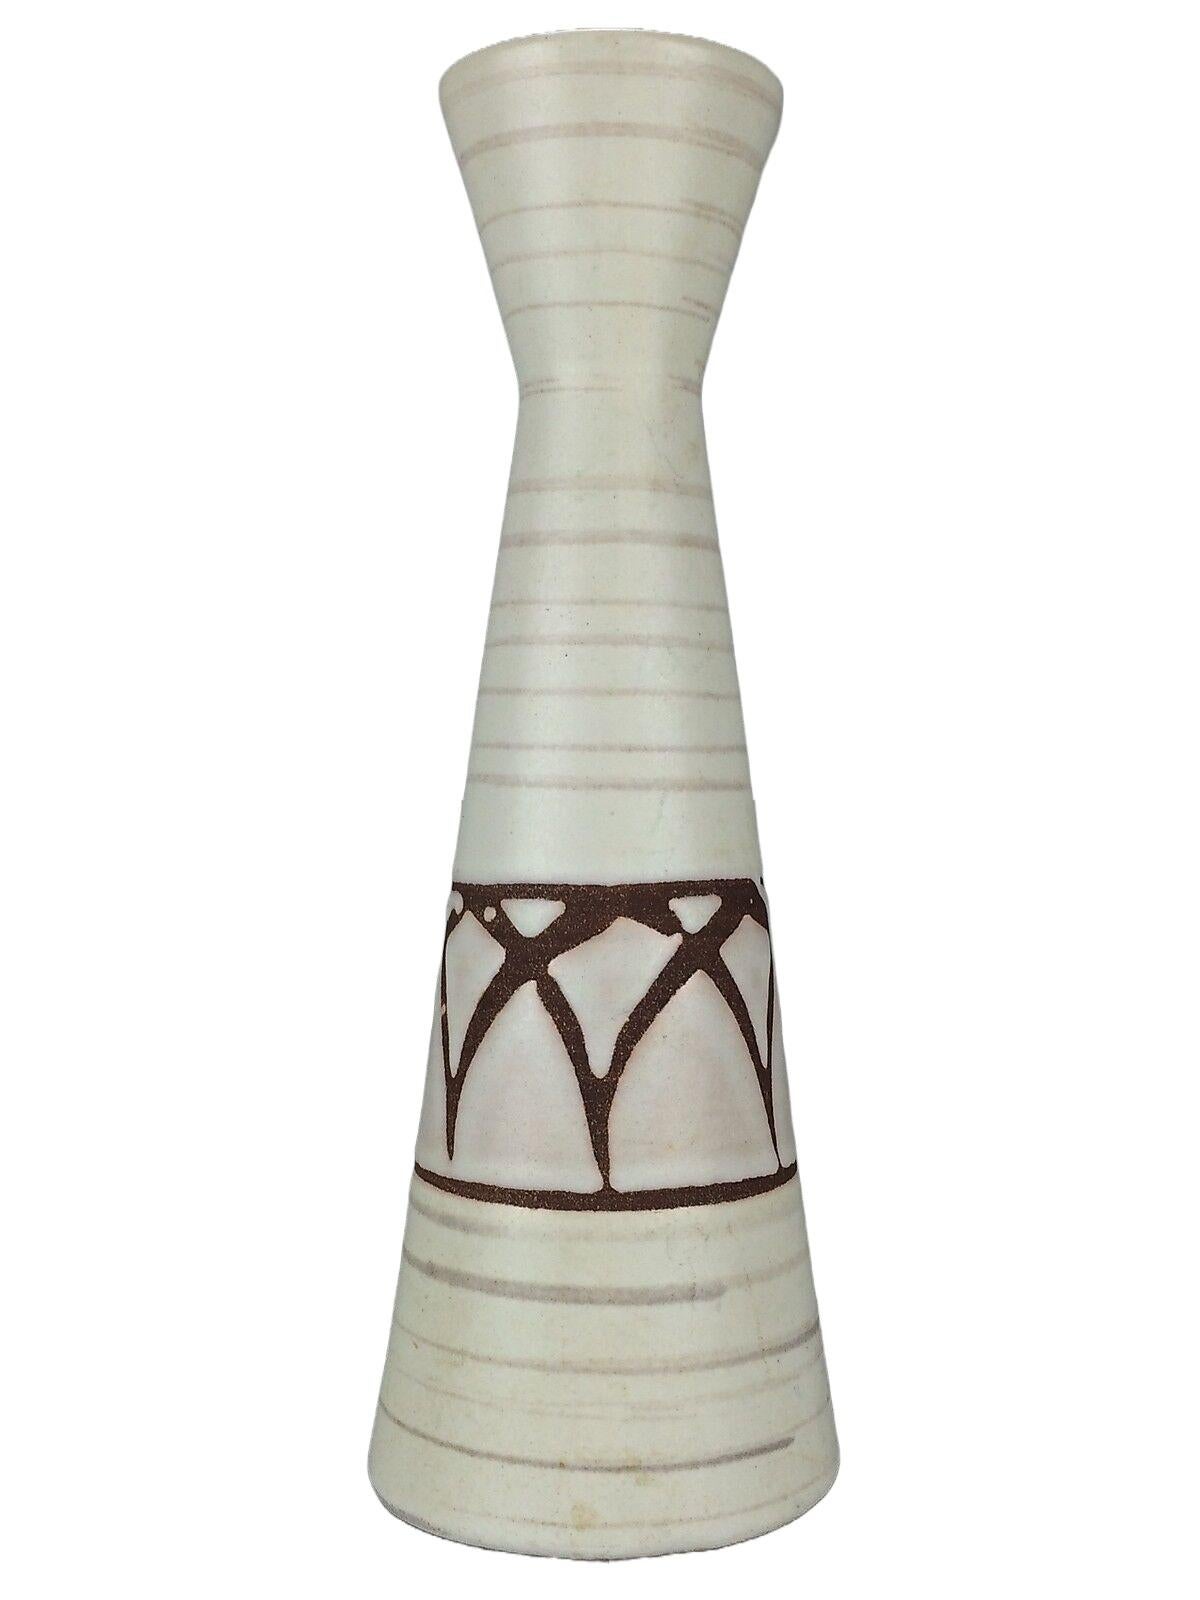 70s Vase flower vase ceramic vase table vase ceramic white brown space age.

Object: vase

Manufacturer:

Condition: good

Age: around 1960-1970

Dimensions:

Diameter = 10cm
Height = 28cm

Other notes:

The pictures serve as part